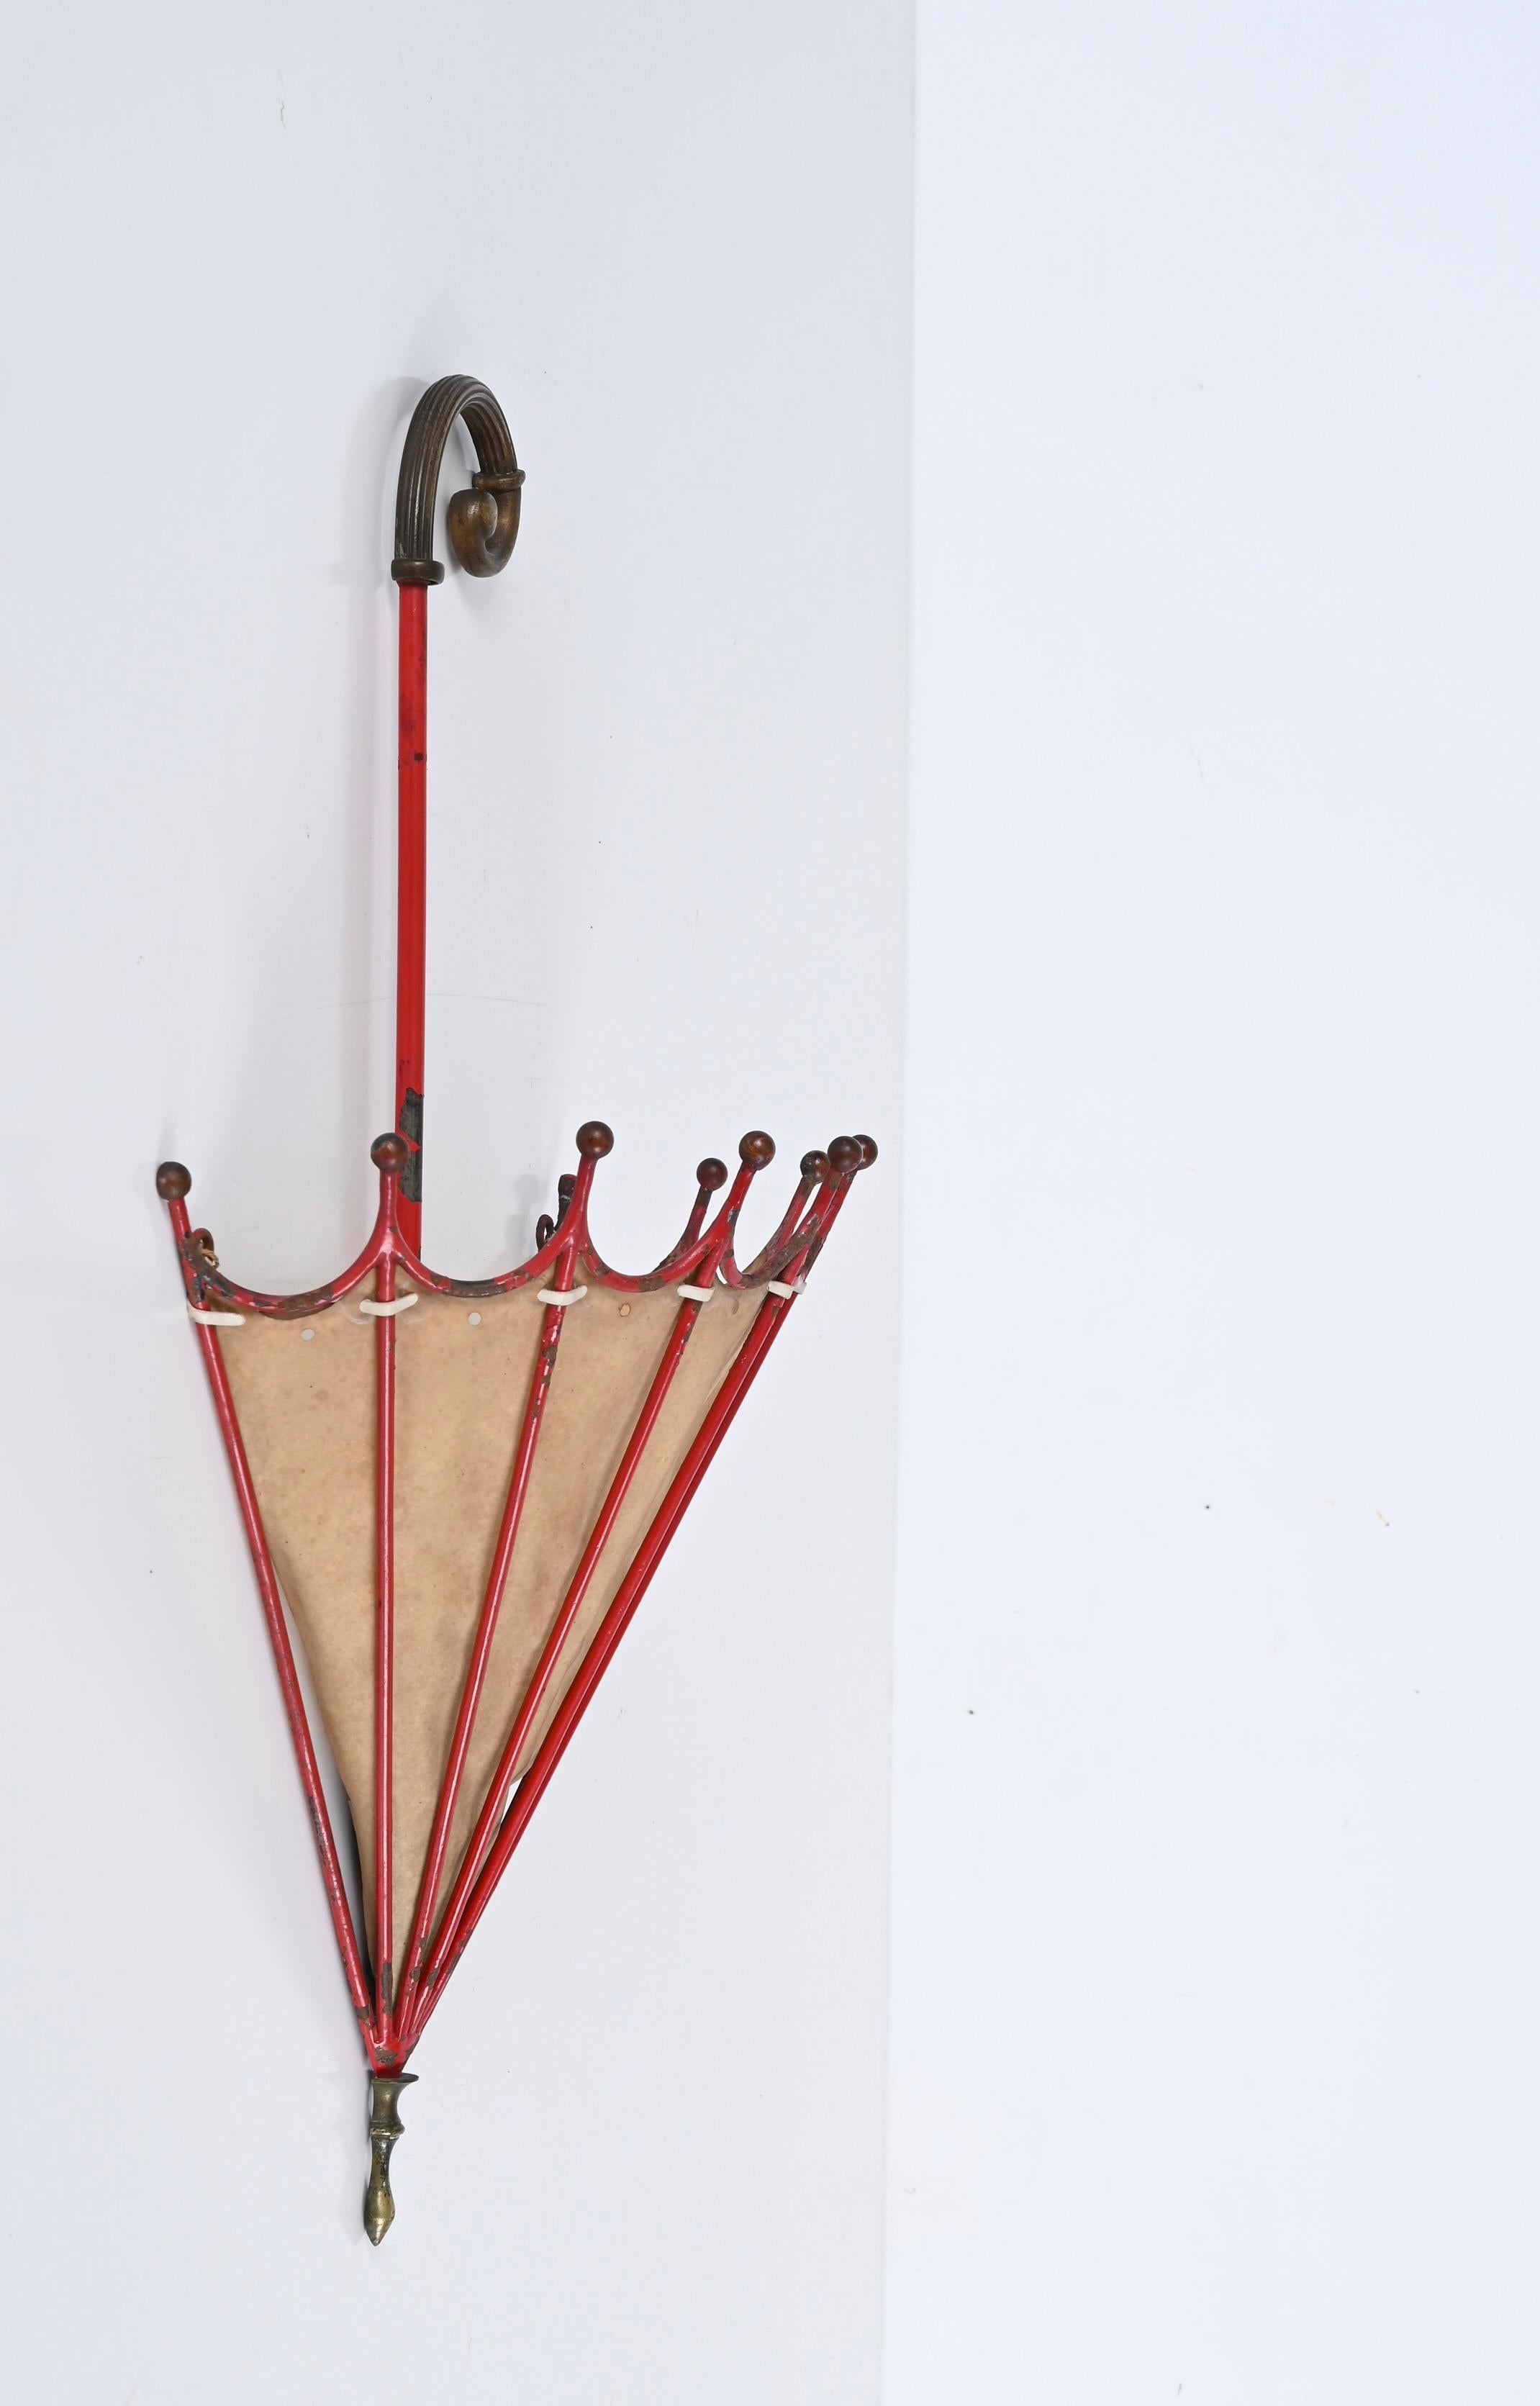 Marvellous Italian Liberty wall light. This unique sconce was produced in Italy in the 1920s. 

This lovely sconce was designed in the shape of an umbrella with the shade made in parchment paper. The structure is made in red enameled wrought iron